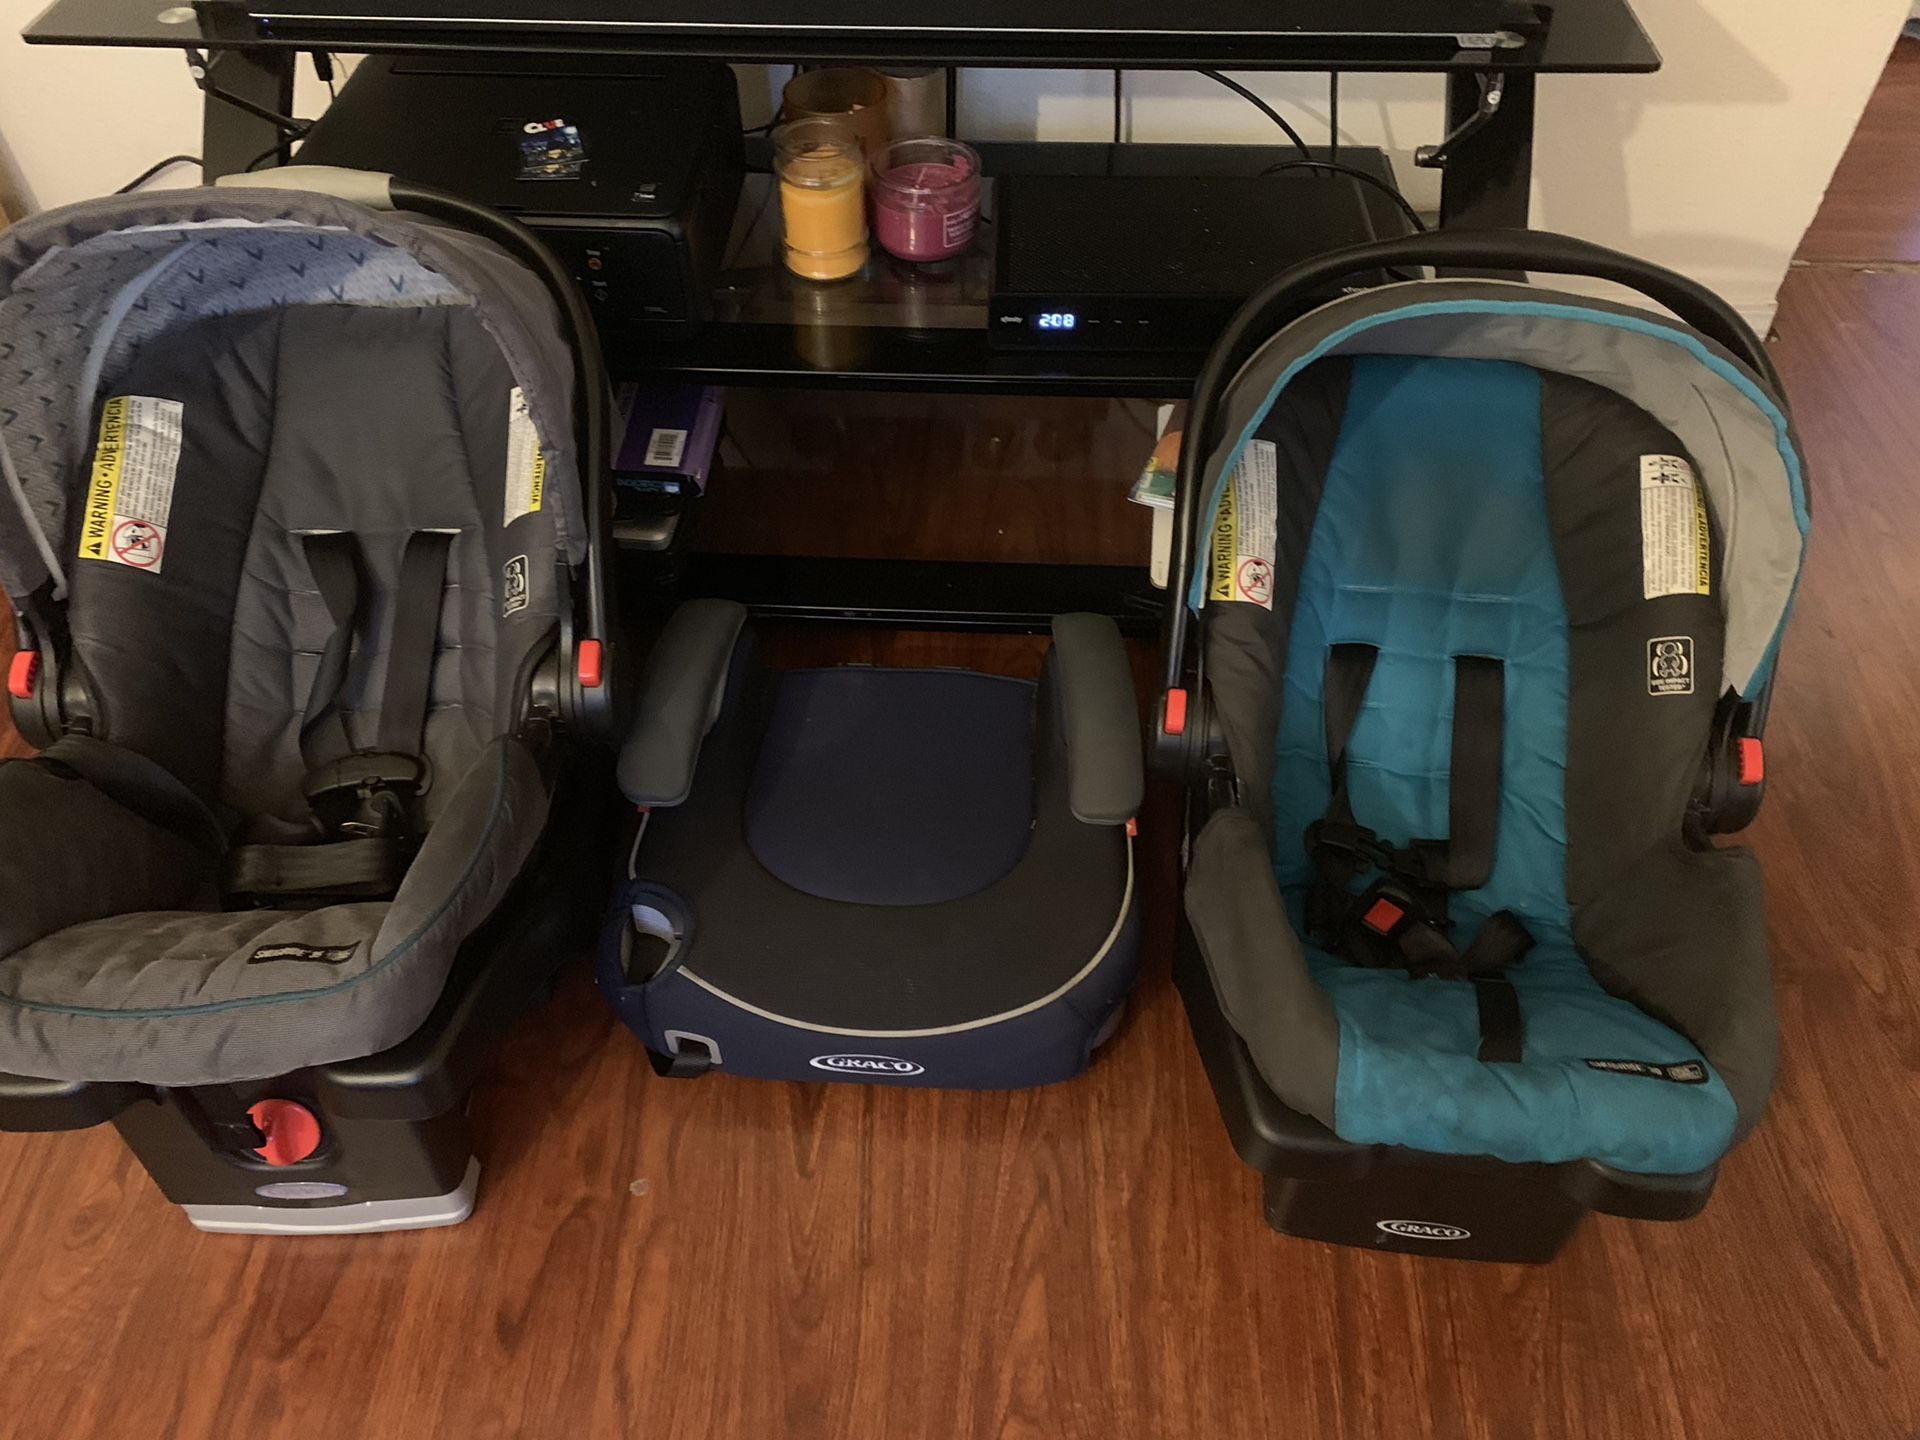 Graco 2 infant car seats and one booster seat